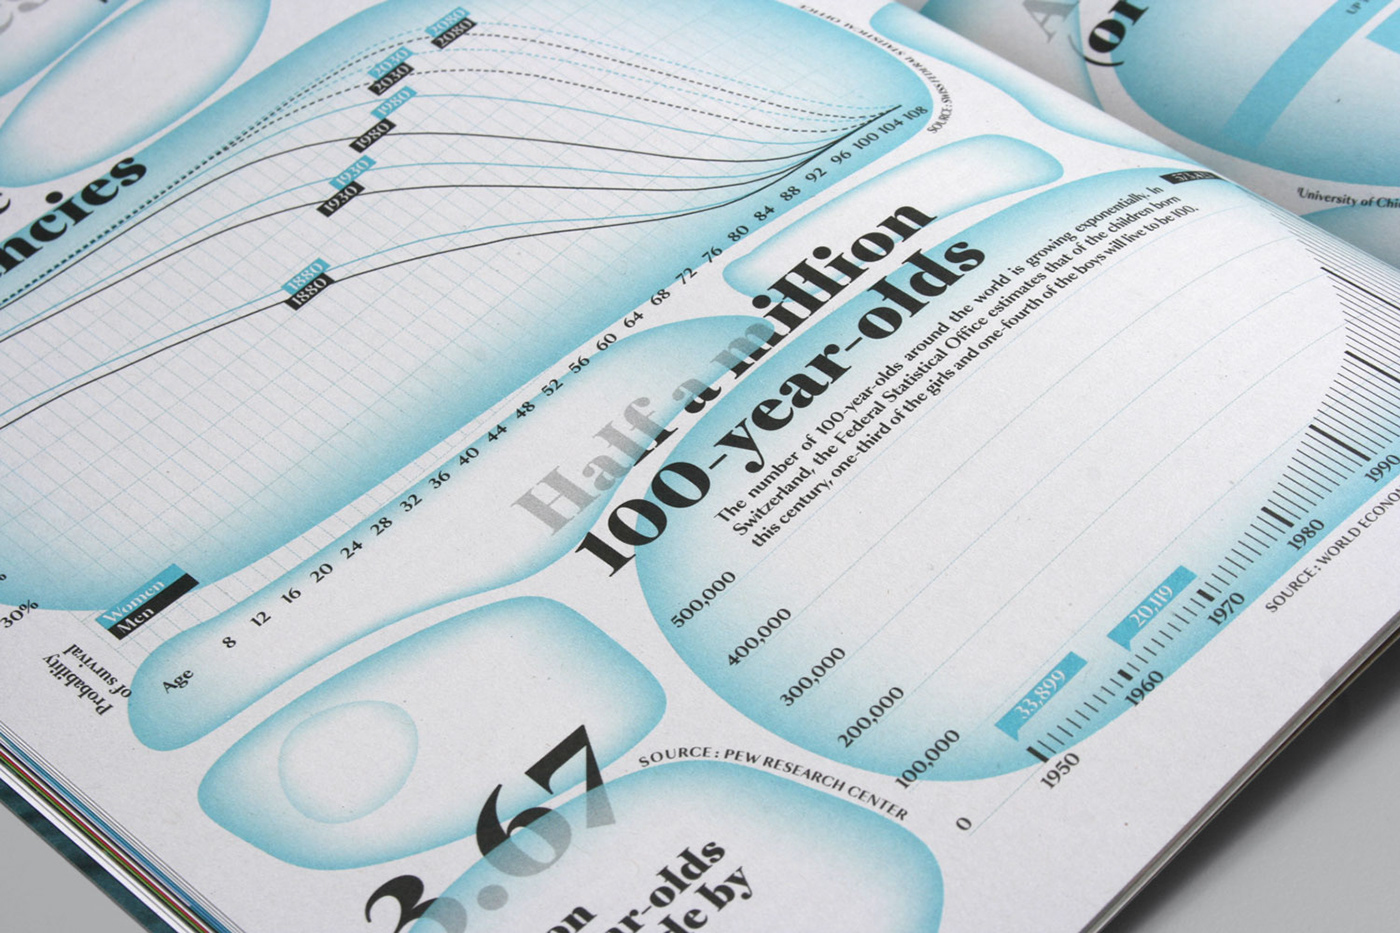 infographic magazine science data visualization dashboard Cell blue swiss design life expectancy